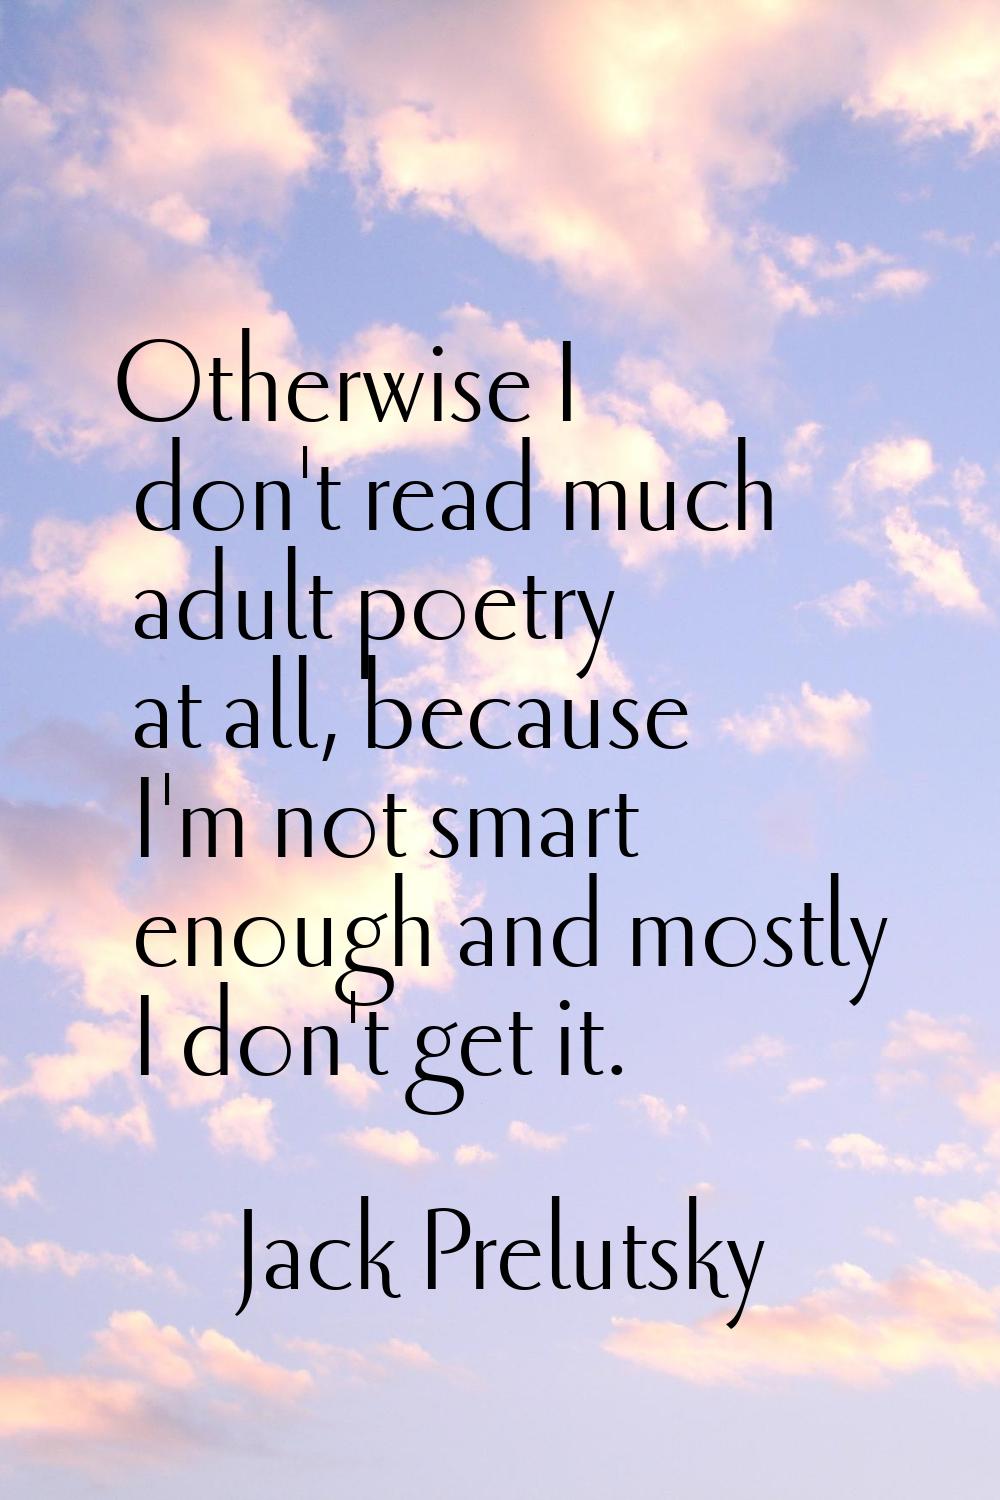 Otherwise I don't read much adult poetry at all, because I'm not smart enough and mostly I don't ge